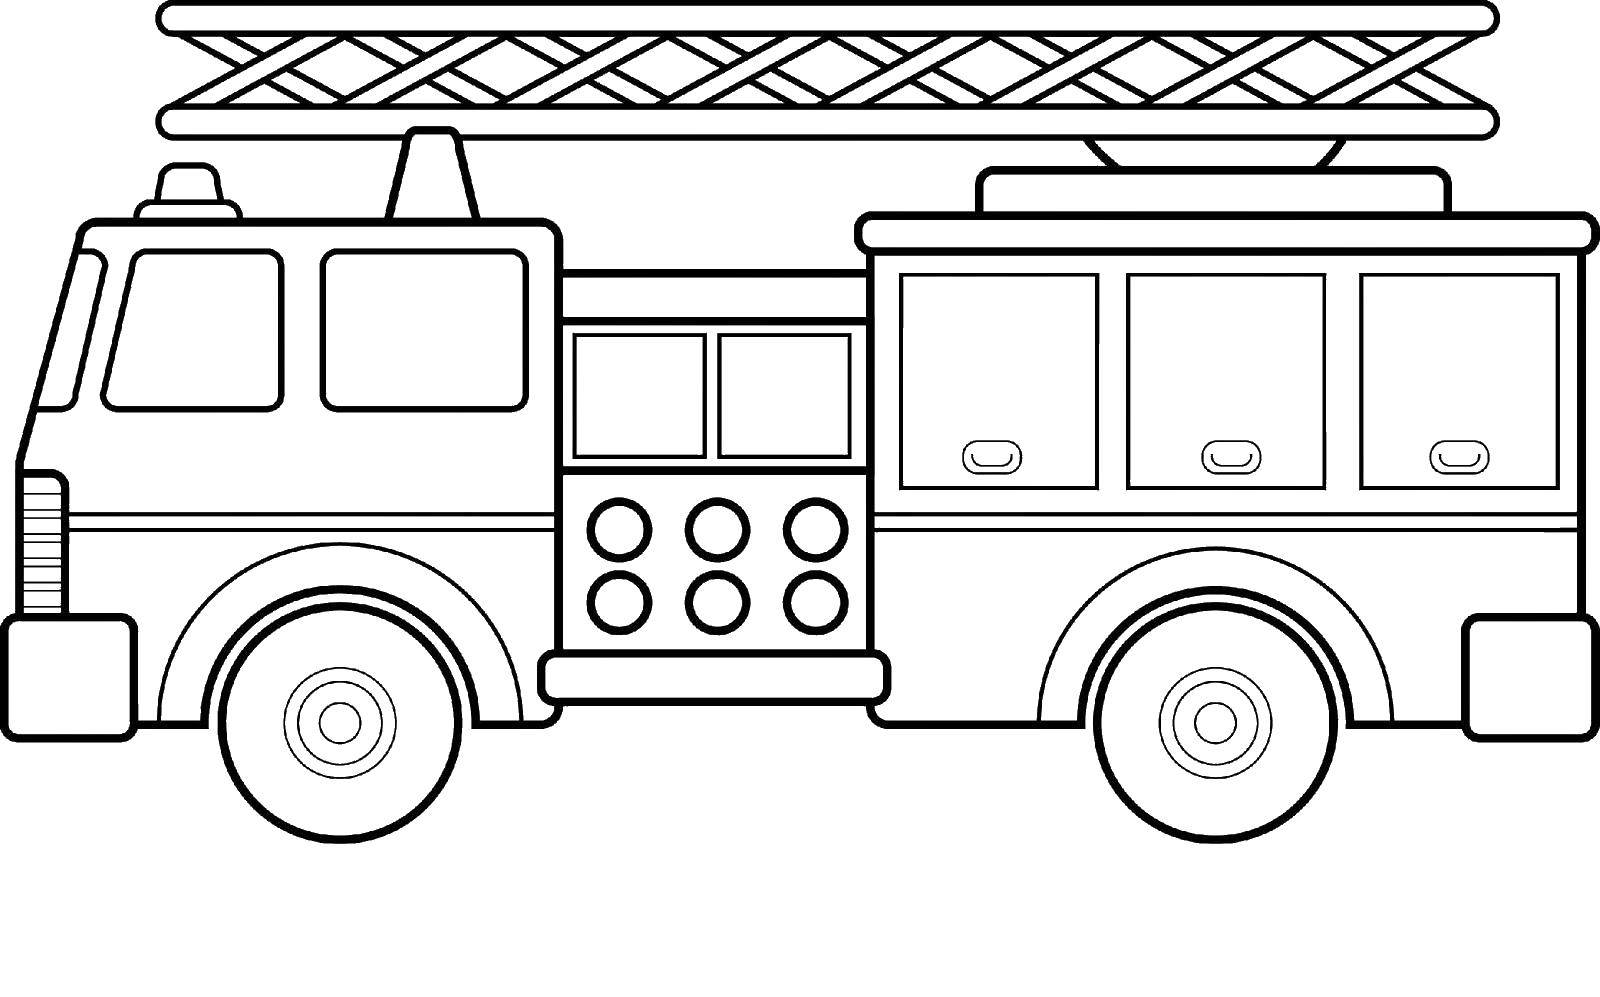 Coloring Big fire truck. Category Fire. Tags:  fire trucks, firefighters.